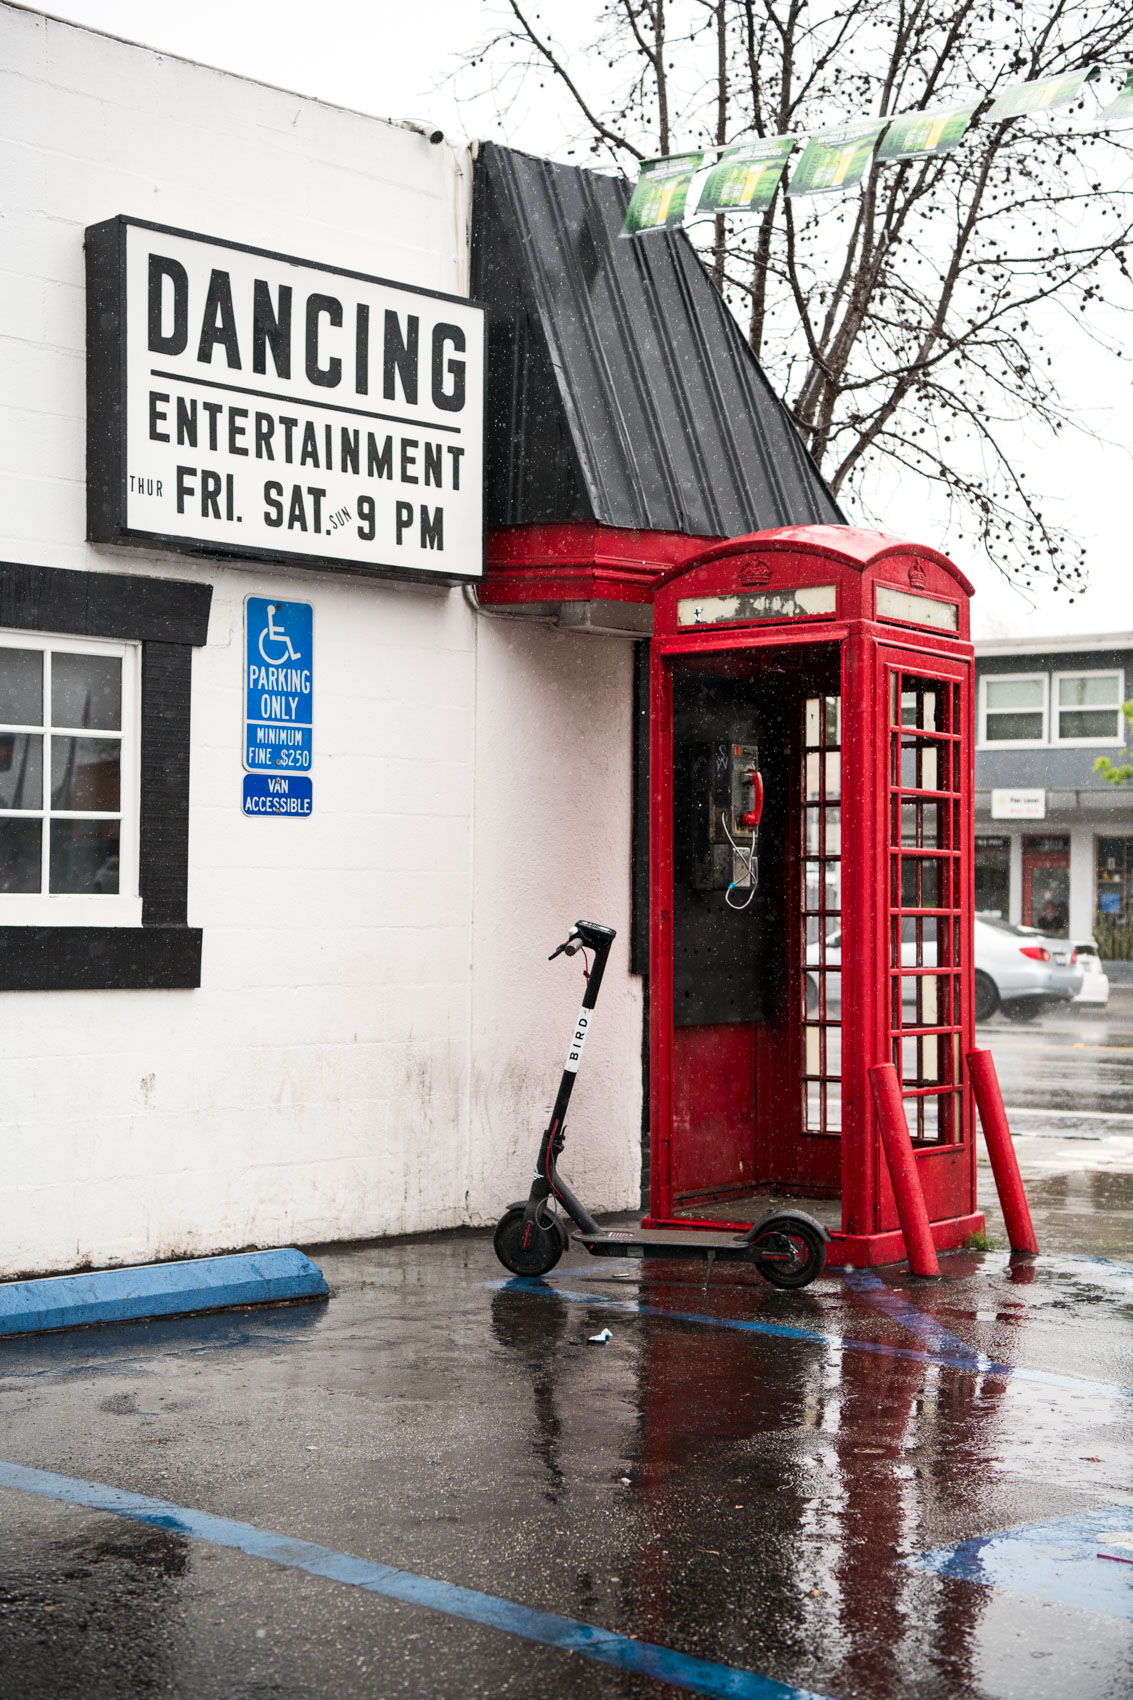 A bird docks scooter in front of a phone booth in the rain in Venice, Calif.